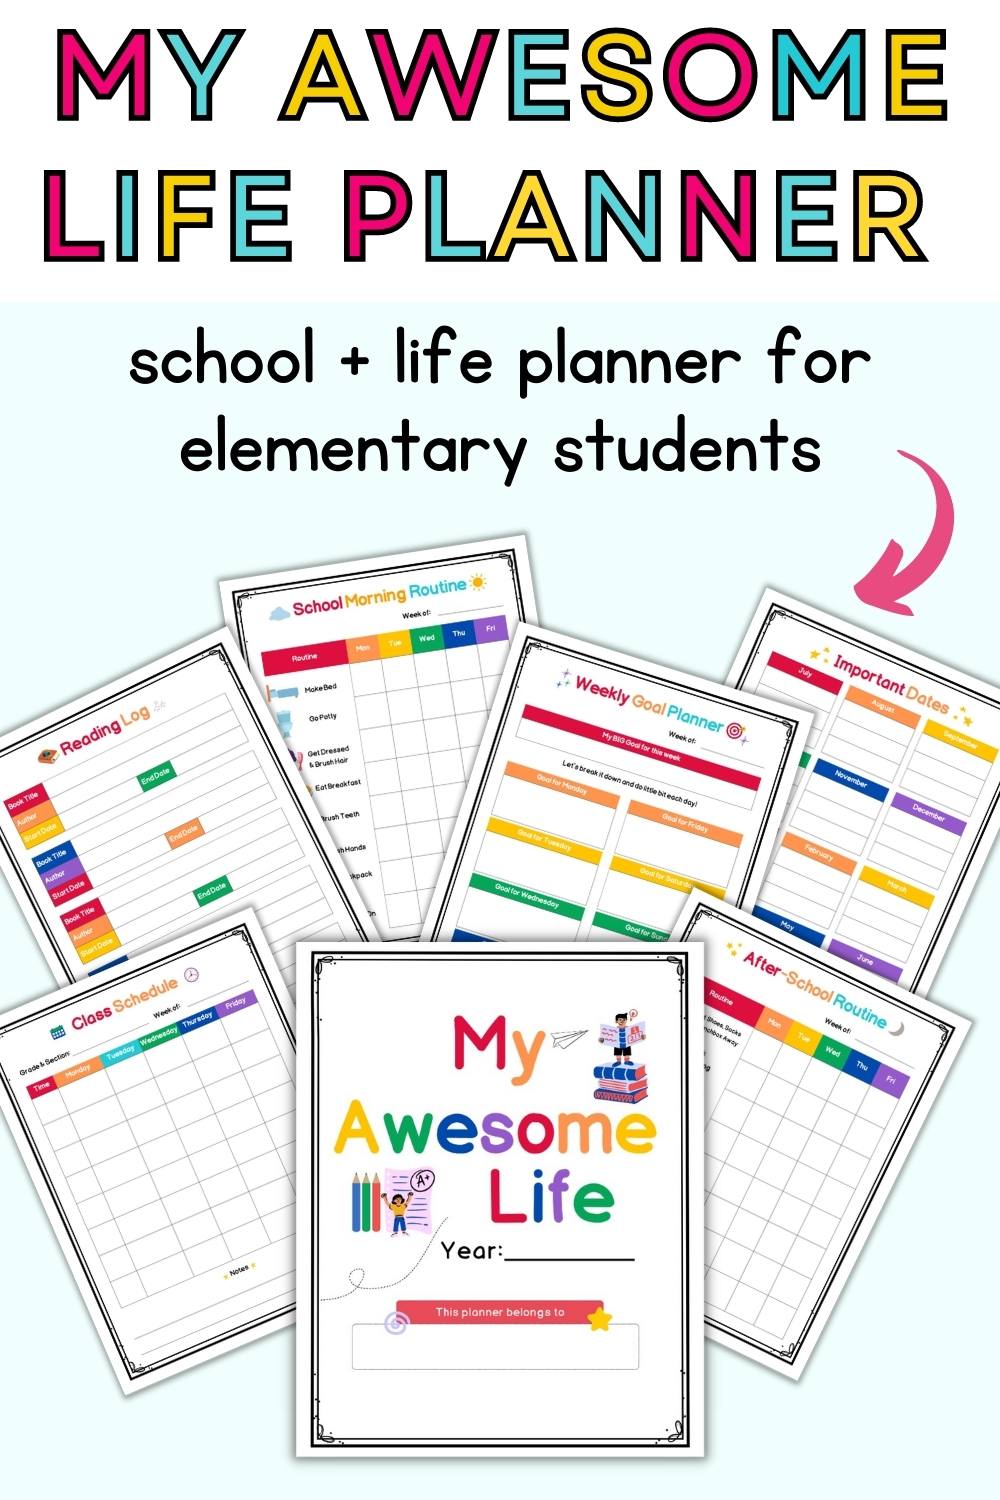 Text "my awesome life planner for elementary students""